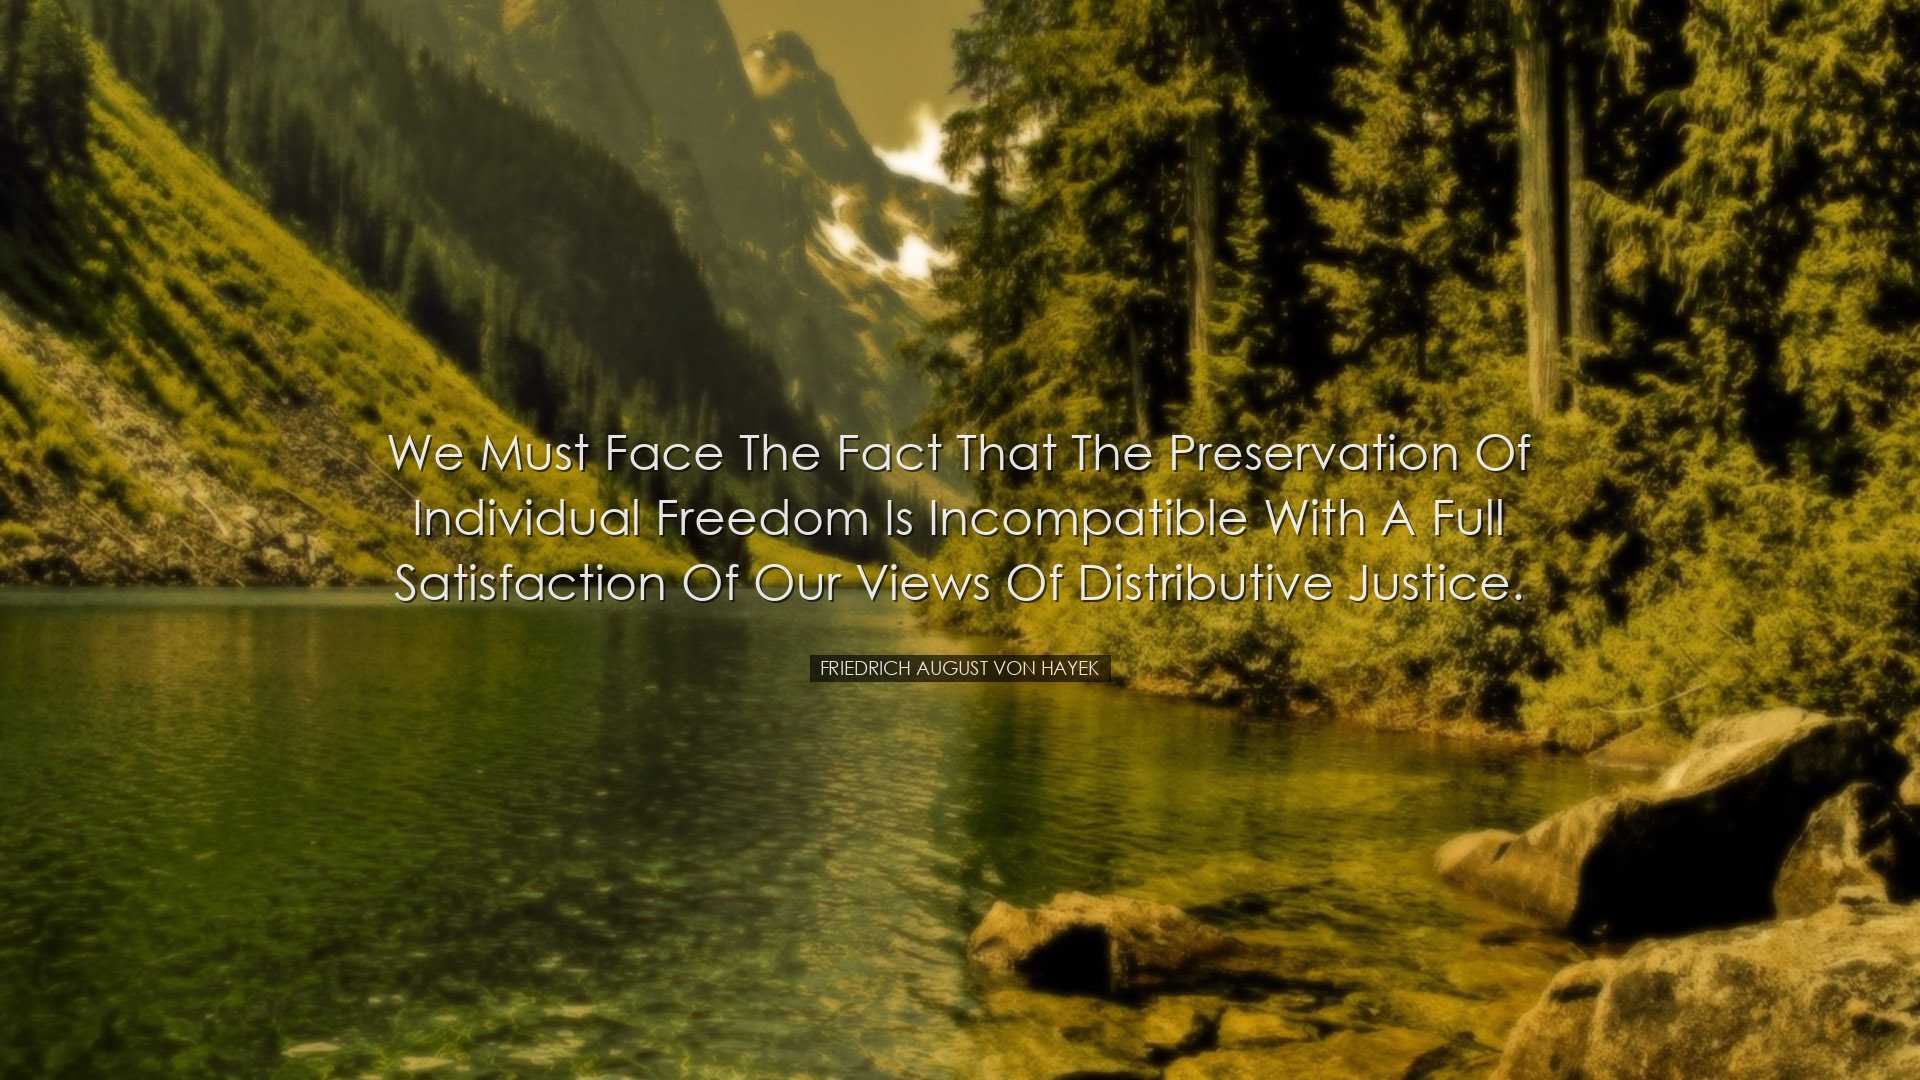 We must face the fact that the preservation of individual freedom